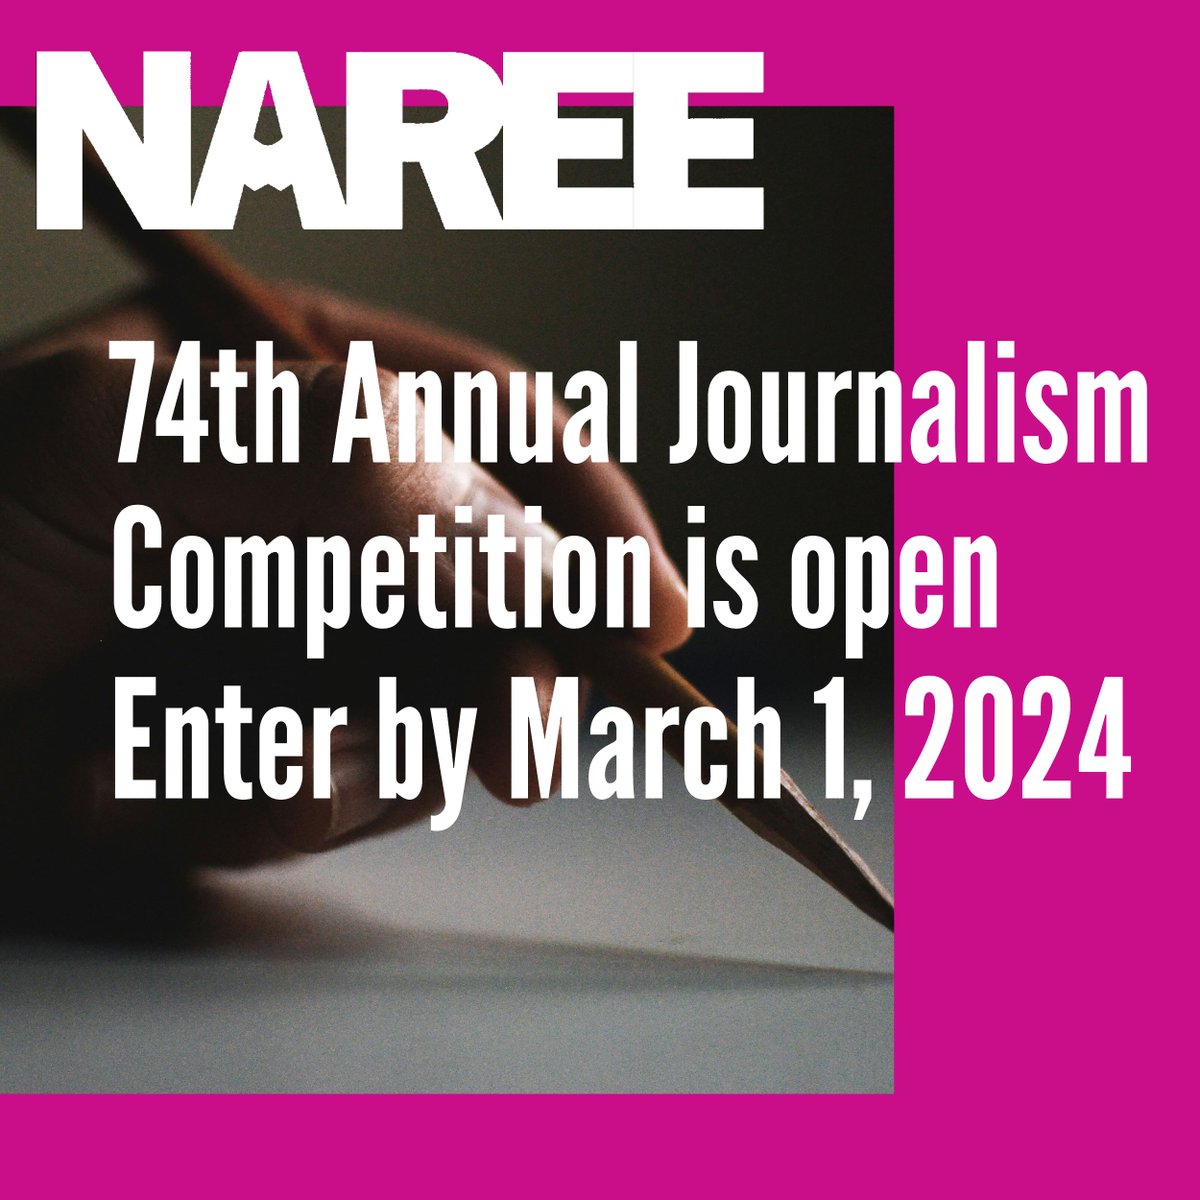 It's that time of year again! NAREE's 74th Annual Journalism Competition is open and accepting entries in 29 categories for journalism about real estate. Enter by the March 1st deadline (no extension again this year). Details on naree.org.